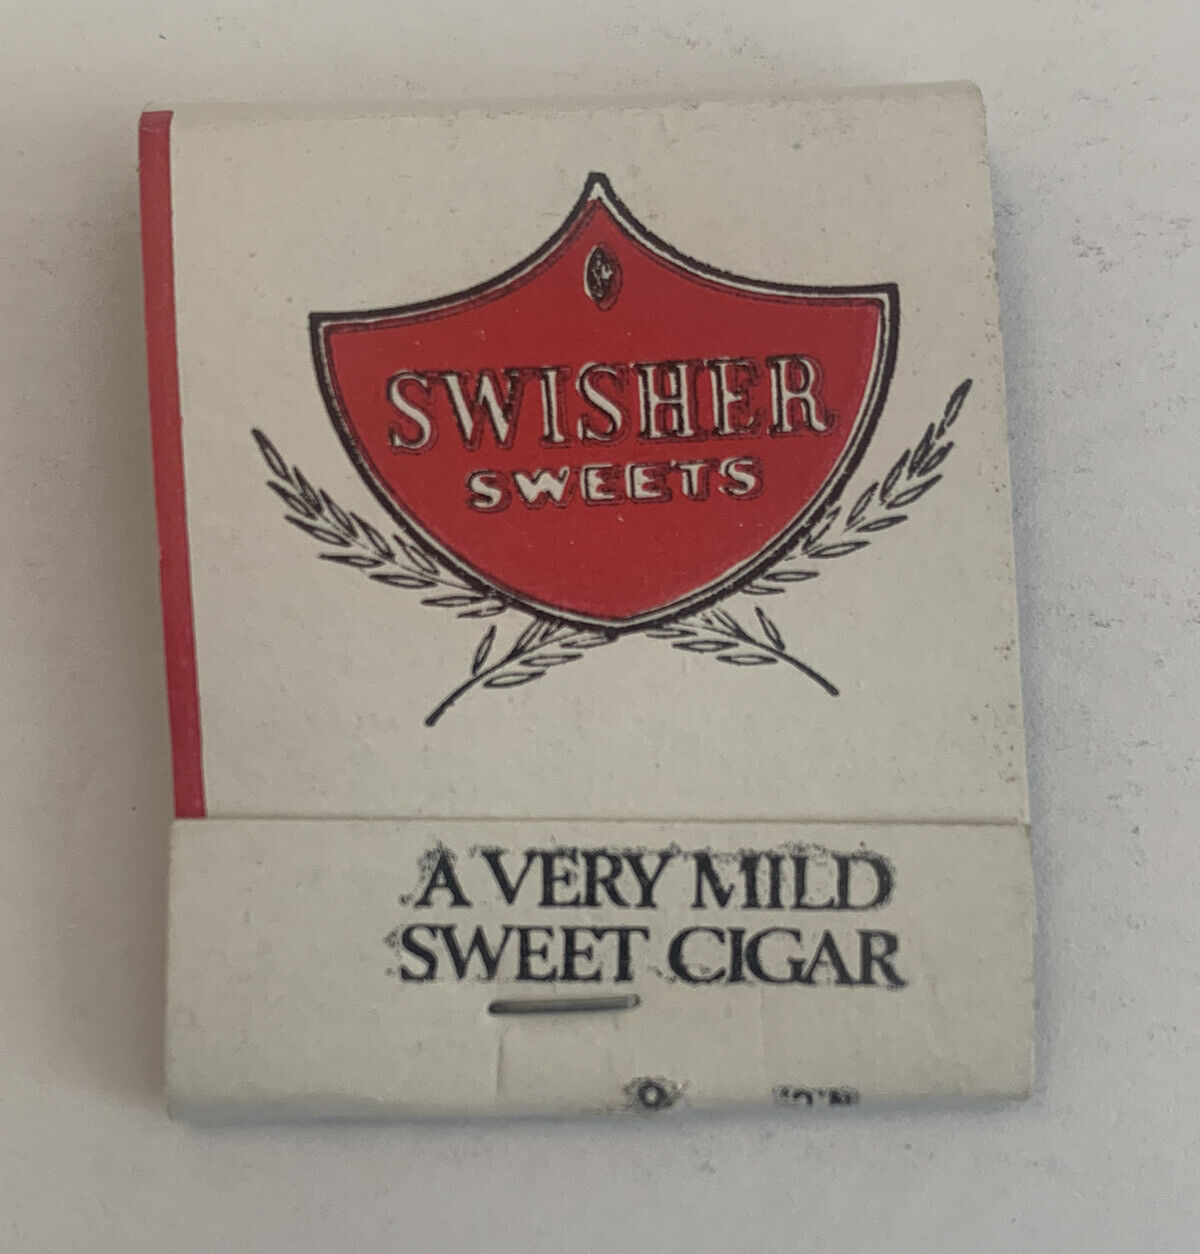 Vintage Swisher Sweets Cigars Matchbook Full Unstruck Ad Souvenir Matches